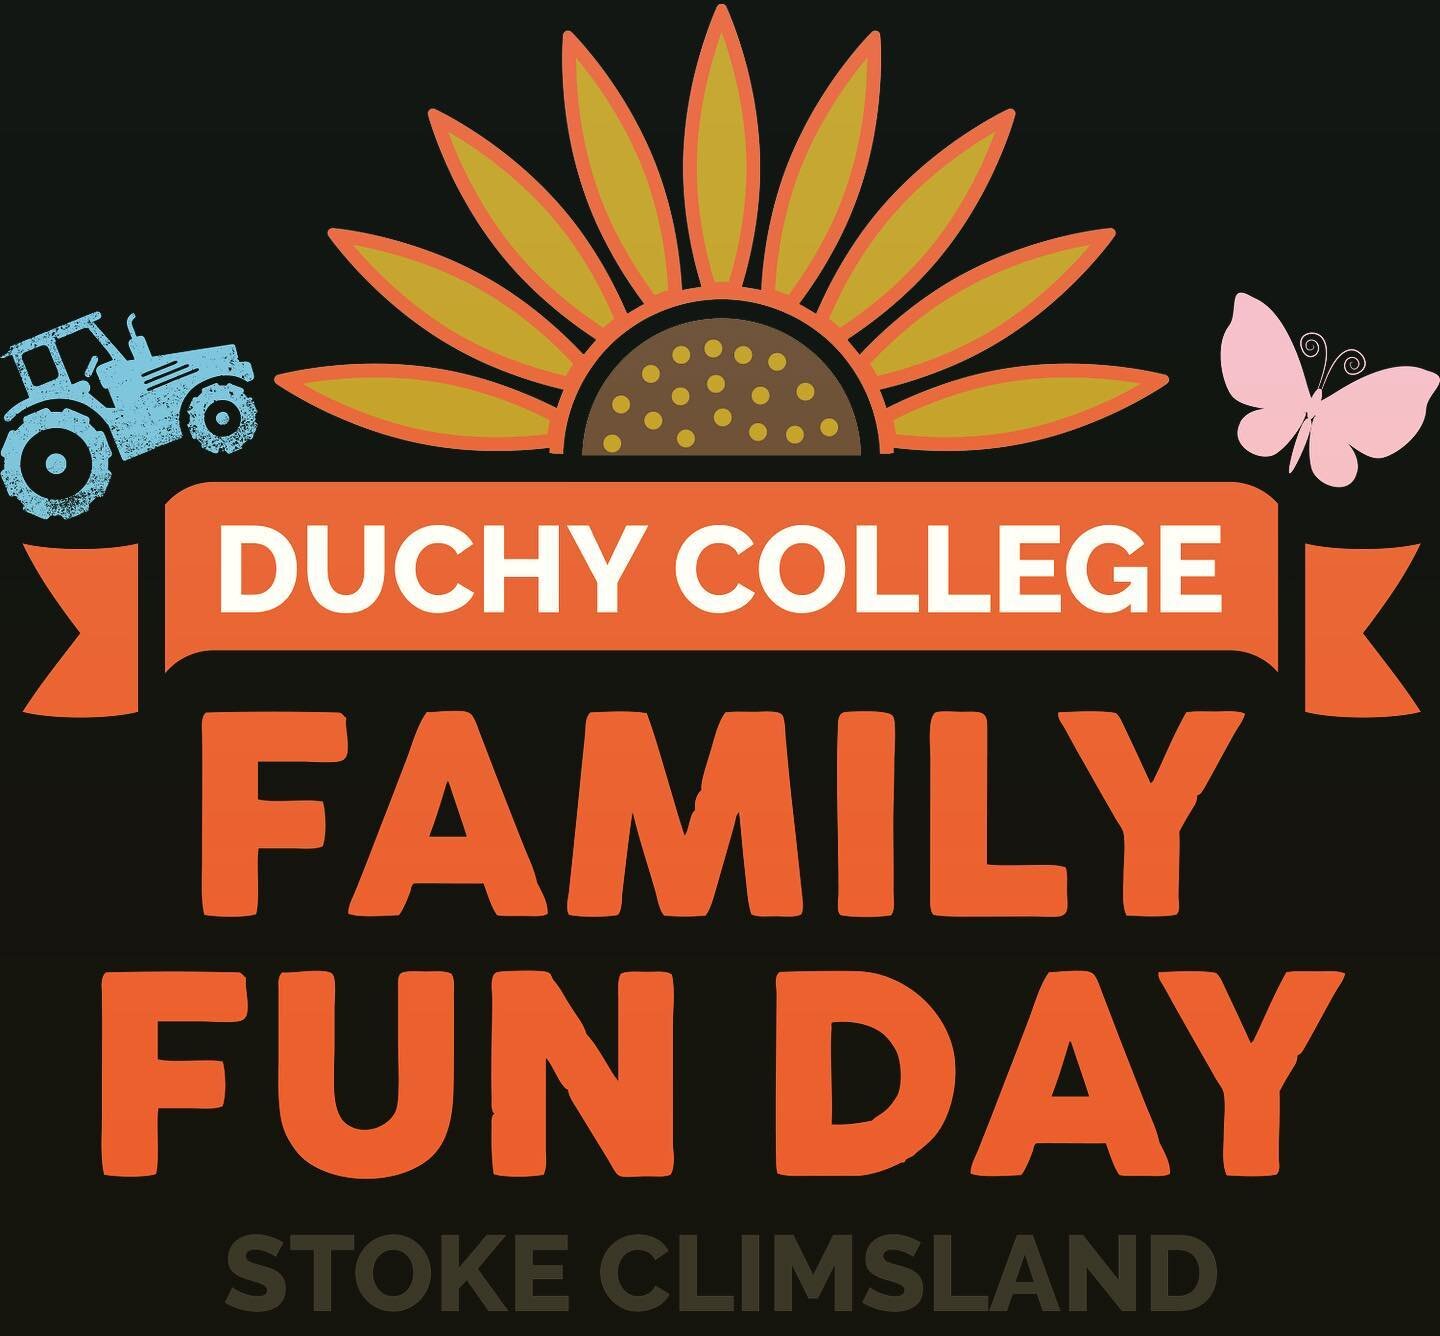 We&rsquo;re looking forward to being back at @duchycollege Family Fun Day this Sunday 2nd July. Come find us up on the main field for some refreshing local Beers, Ciders, Ales and a couple of cheeky cocktails to help brighten up your Sunday!

Plenty 